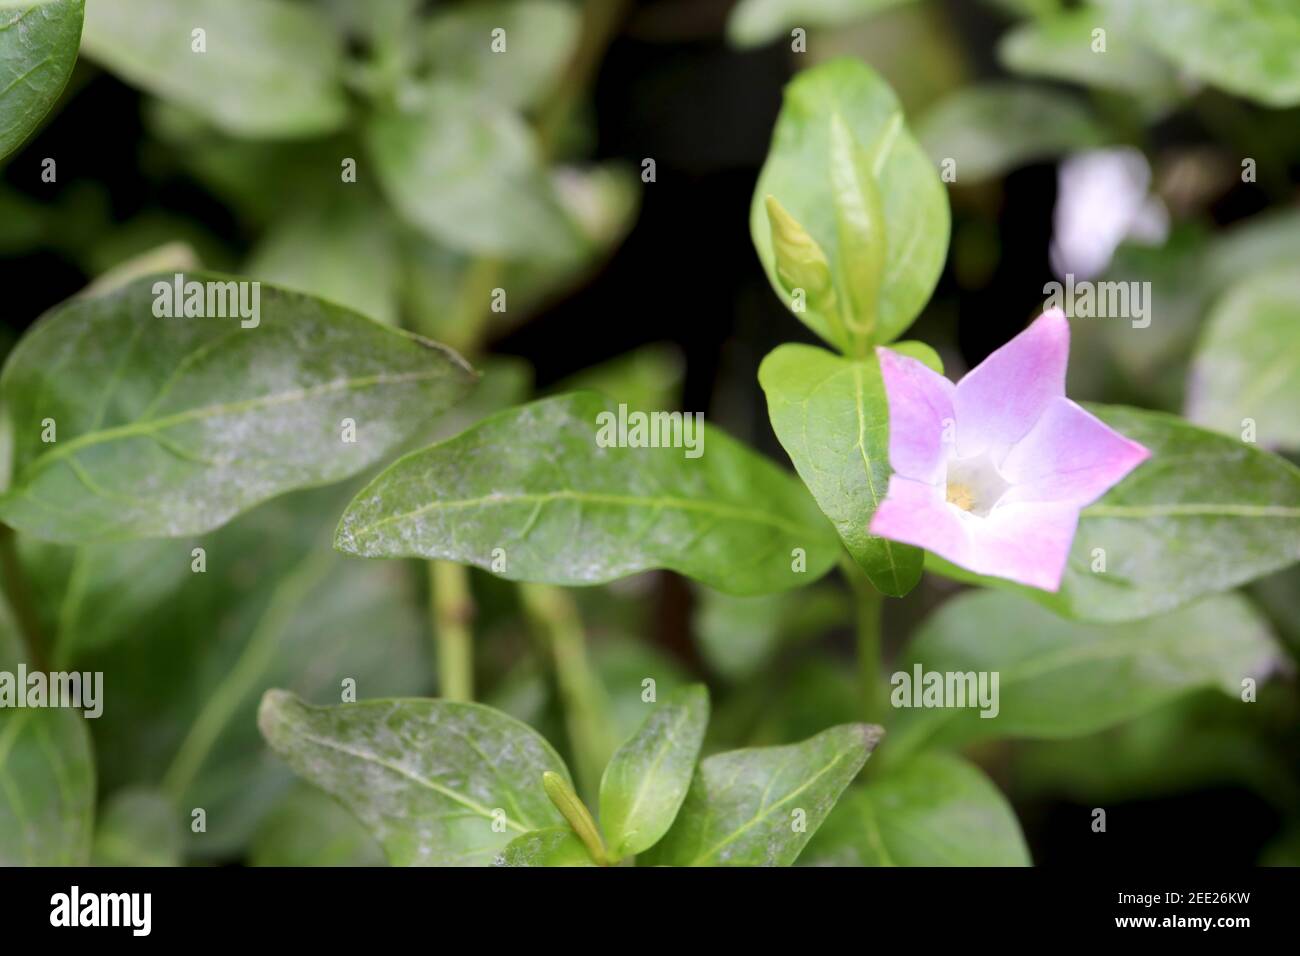 Vinca difformis ‘Jenny Pym’ Intermediate periwinkle - pink star-shaped flowers with pointed petals tips, February, England, UK Stock Photo